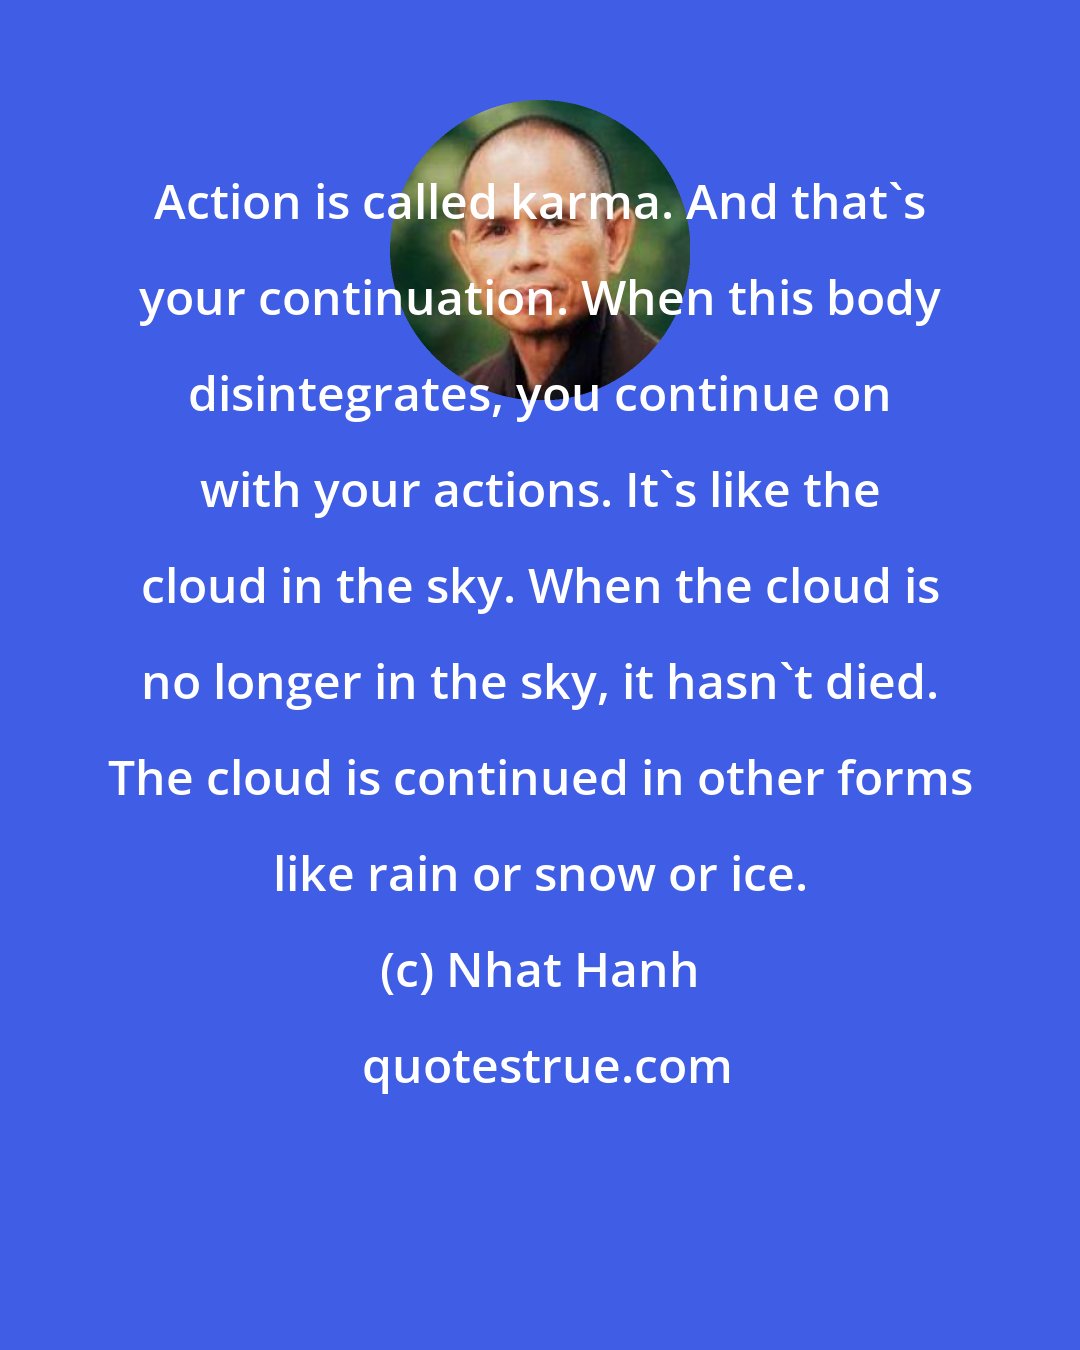 Nhat Hanh: Action is called karma. And that's your continuation. When this body disintegrates, you continue on with your actions. It's like the cloud in the sky. When the cloud is no longer in the sky, it hasn't died. The cloud is continued in other forms like rain or snow or ice.